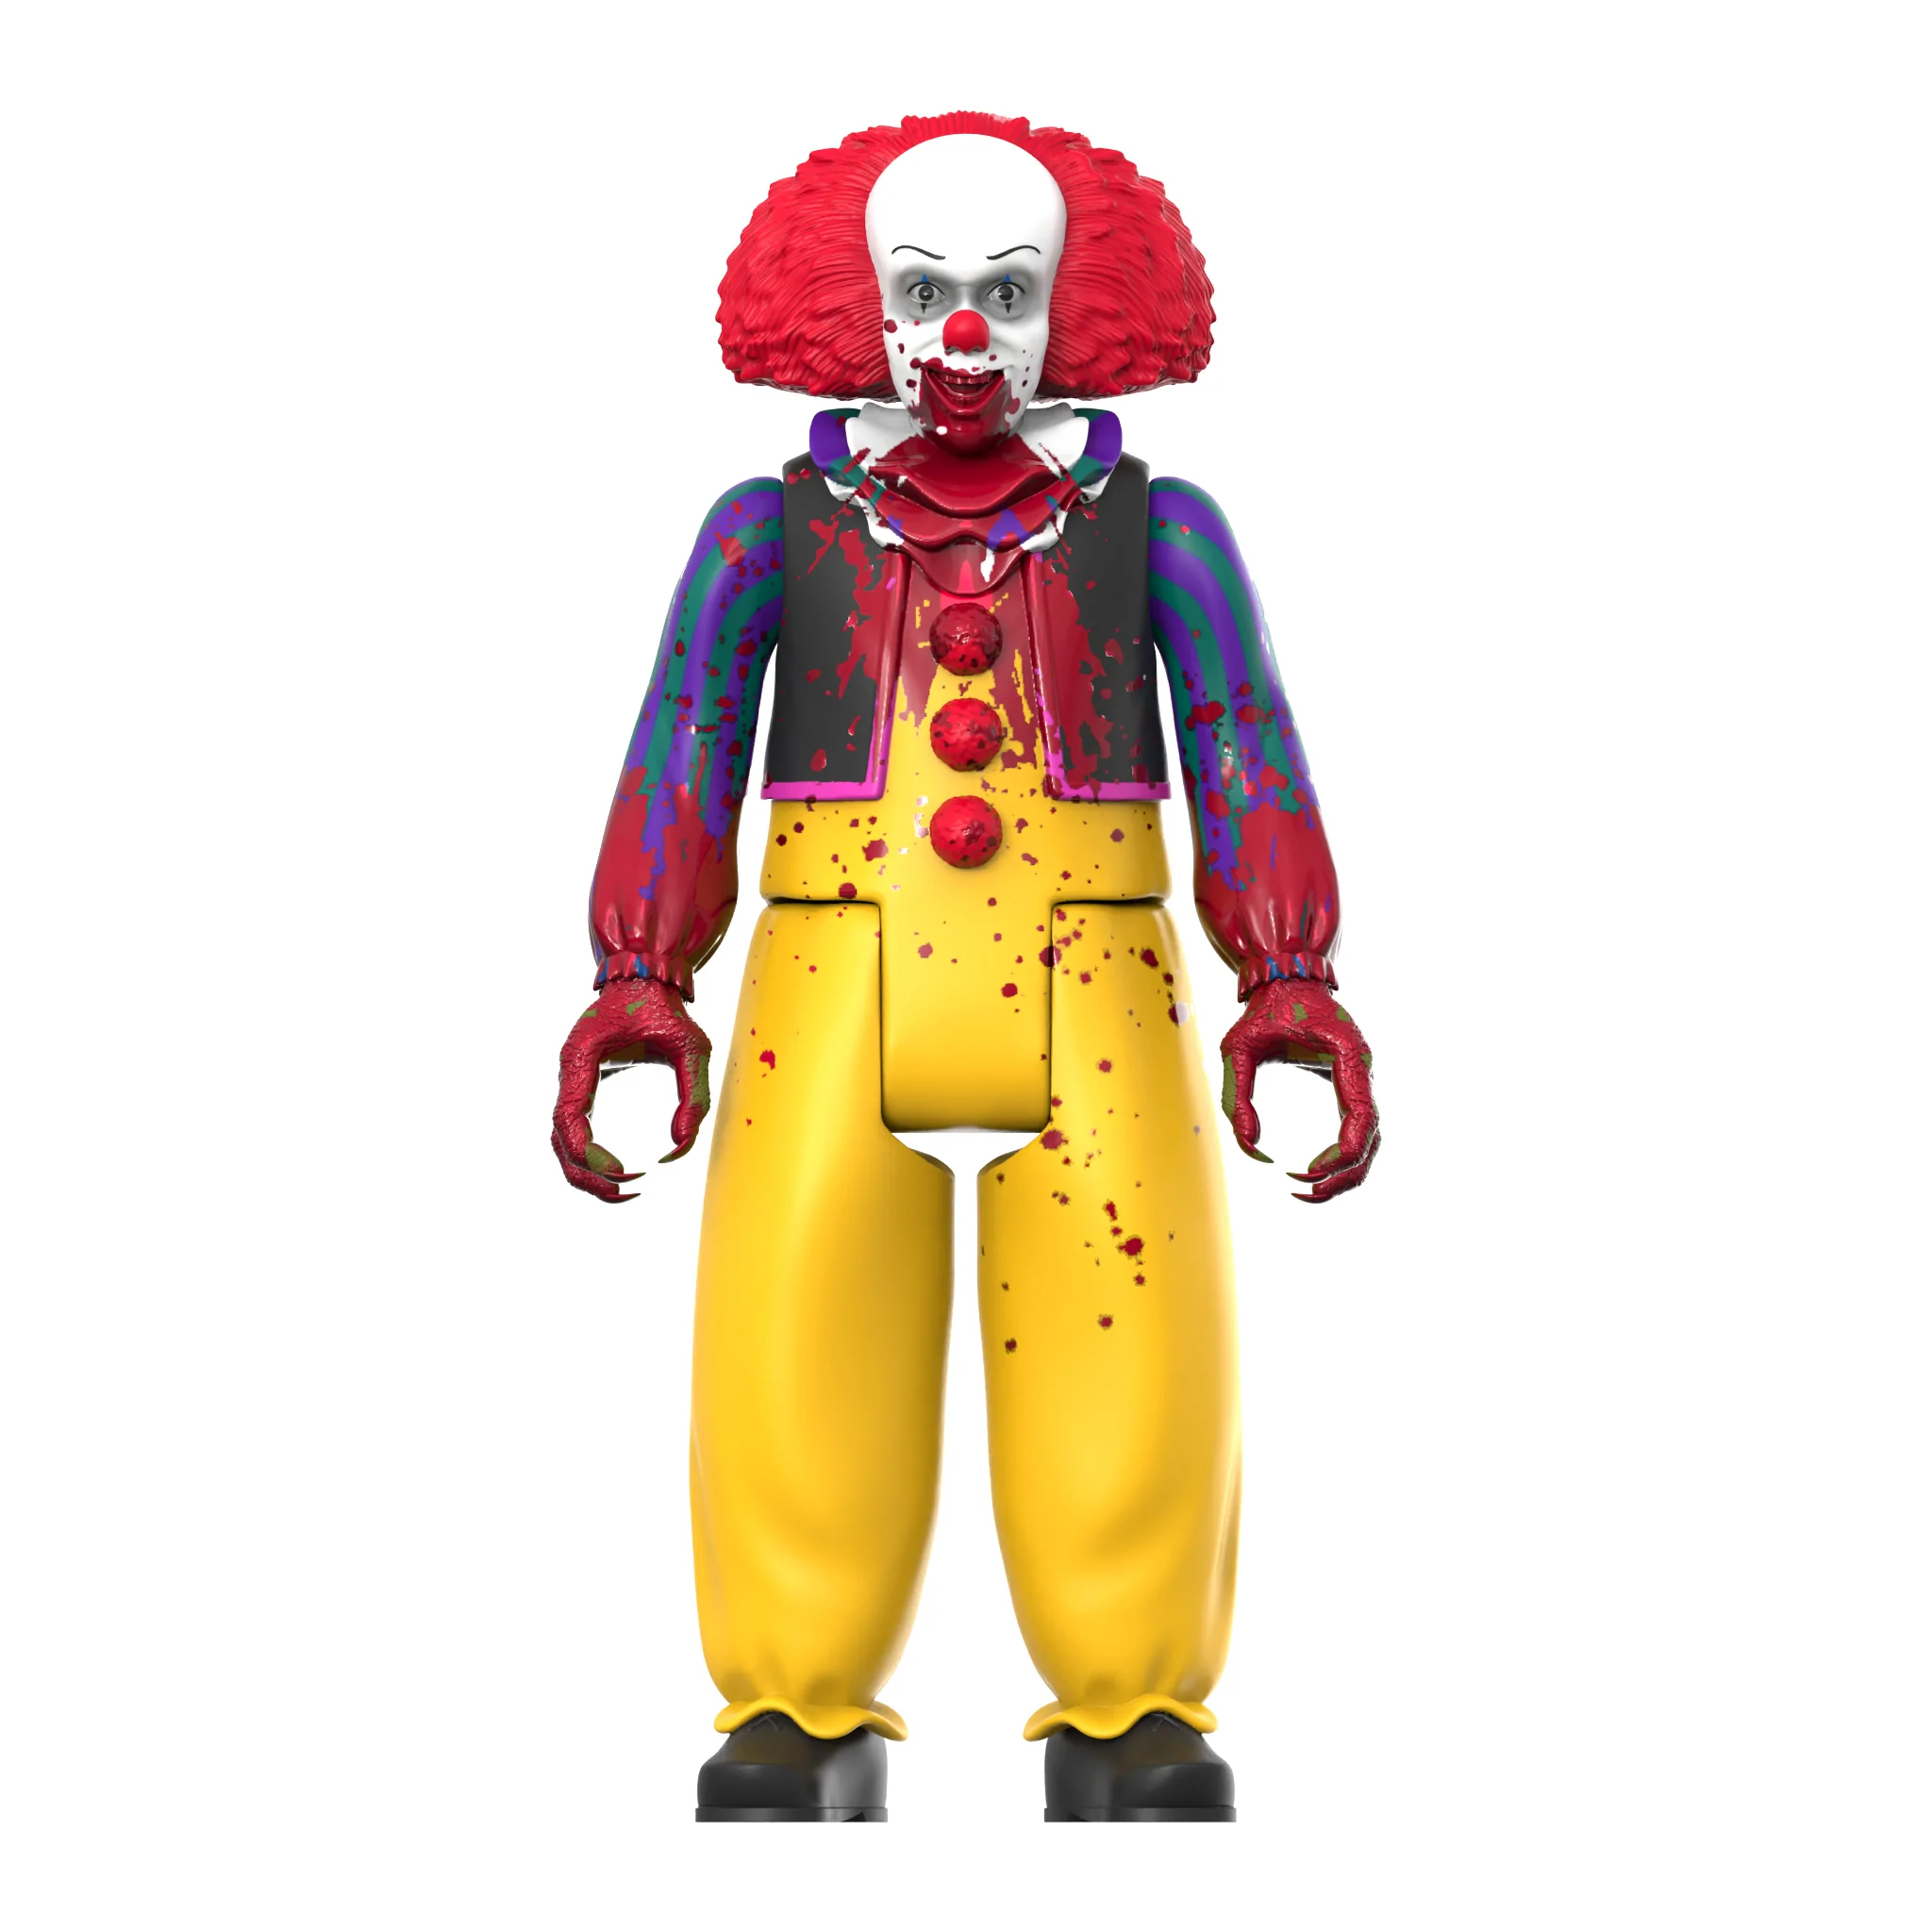 Super7 Figurine Pennywise1990 2022 Version Bloodied 03